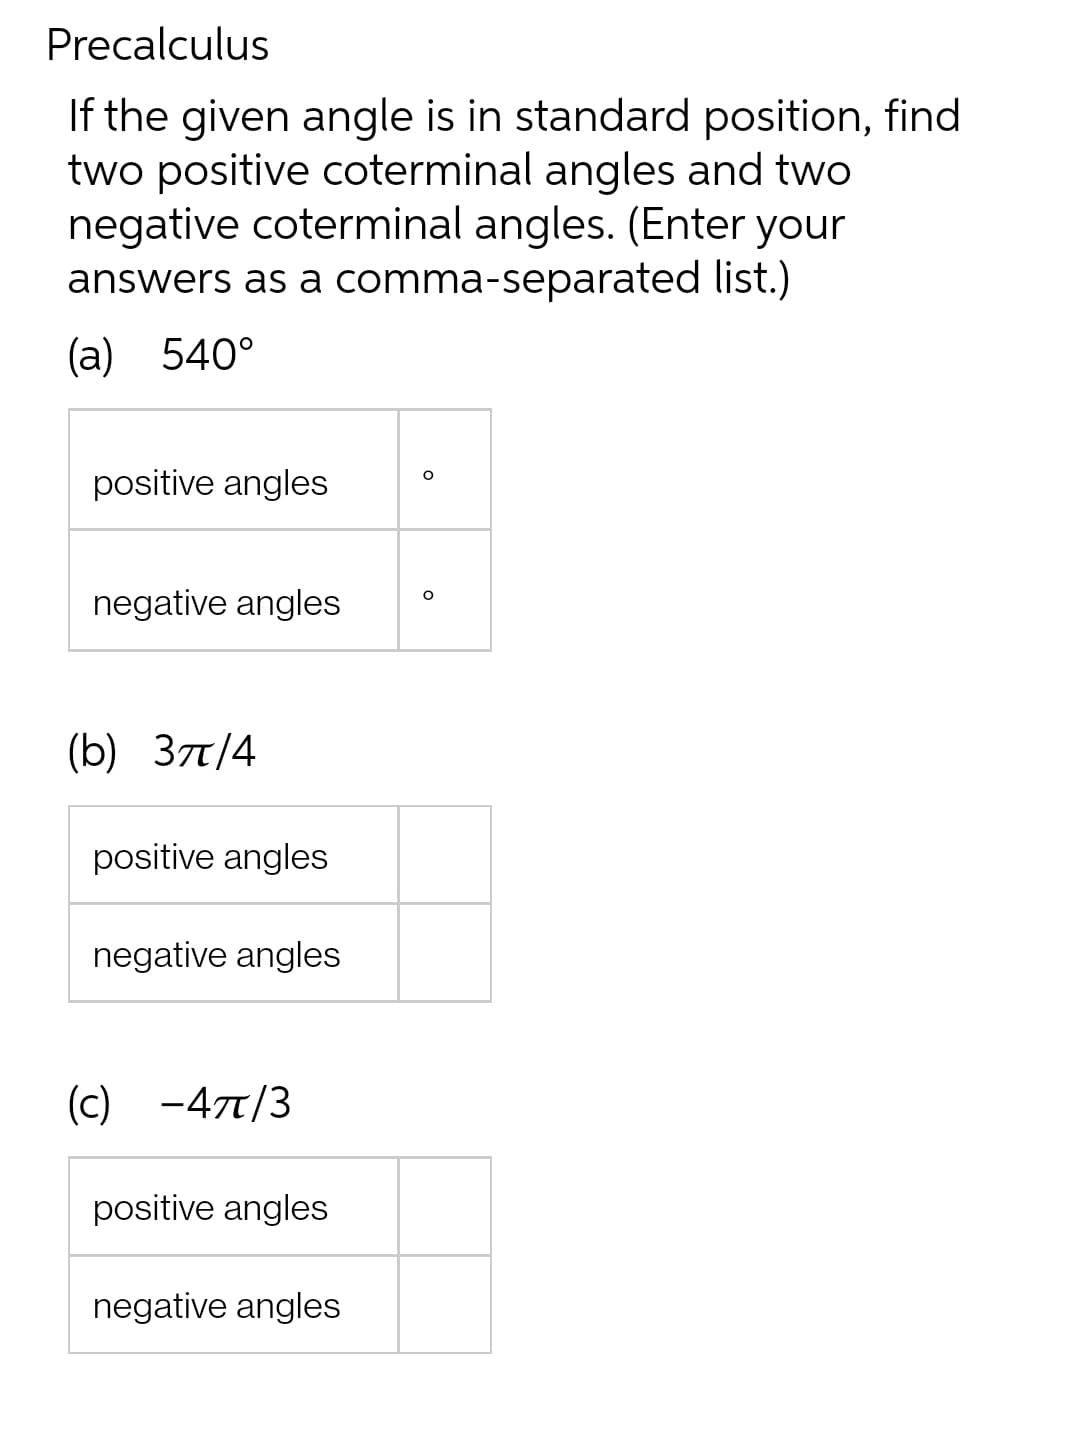 Precalculus
If the given angle is in standard position, find
two positive coterminal angles and two
negative coterminal angles. (Enter your
answers as a comma-separated list.)
(a) 540°
positive angles
negative angles
(b) 3π/4
positive angles
negative angles
(C) -47/3
positive angles
negative angles
O